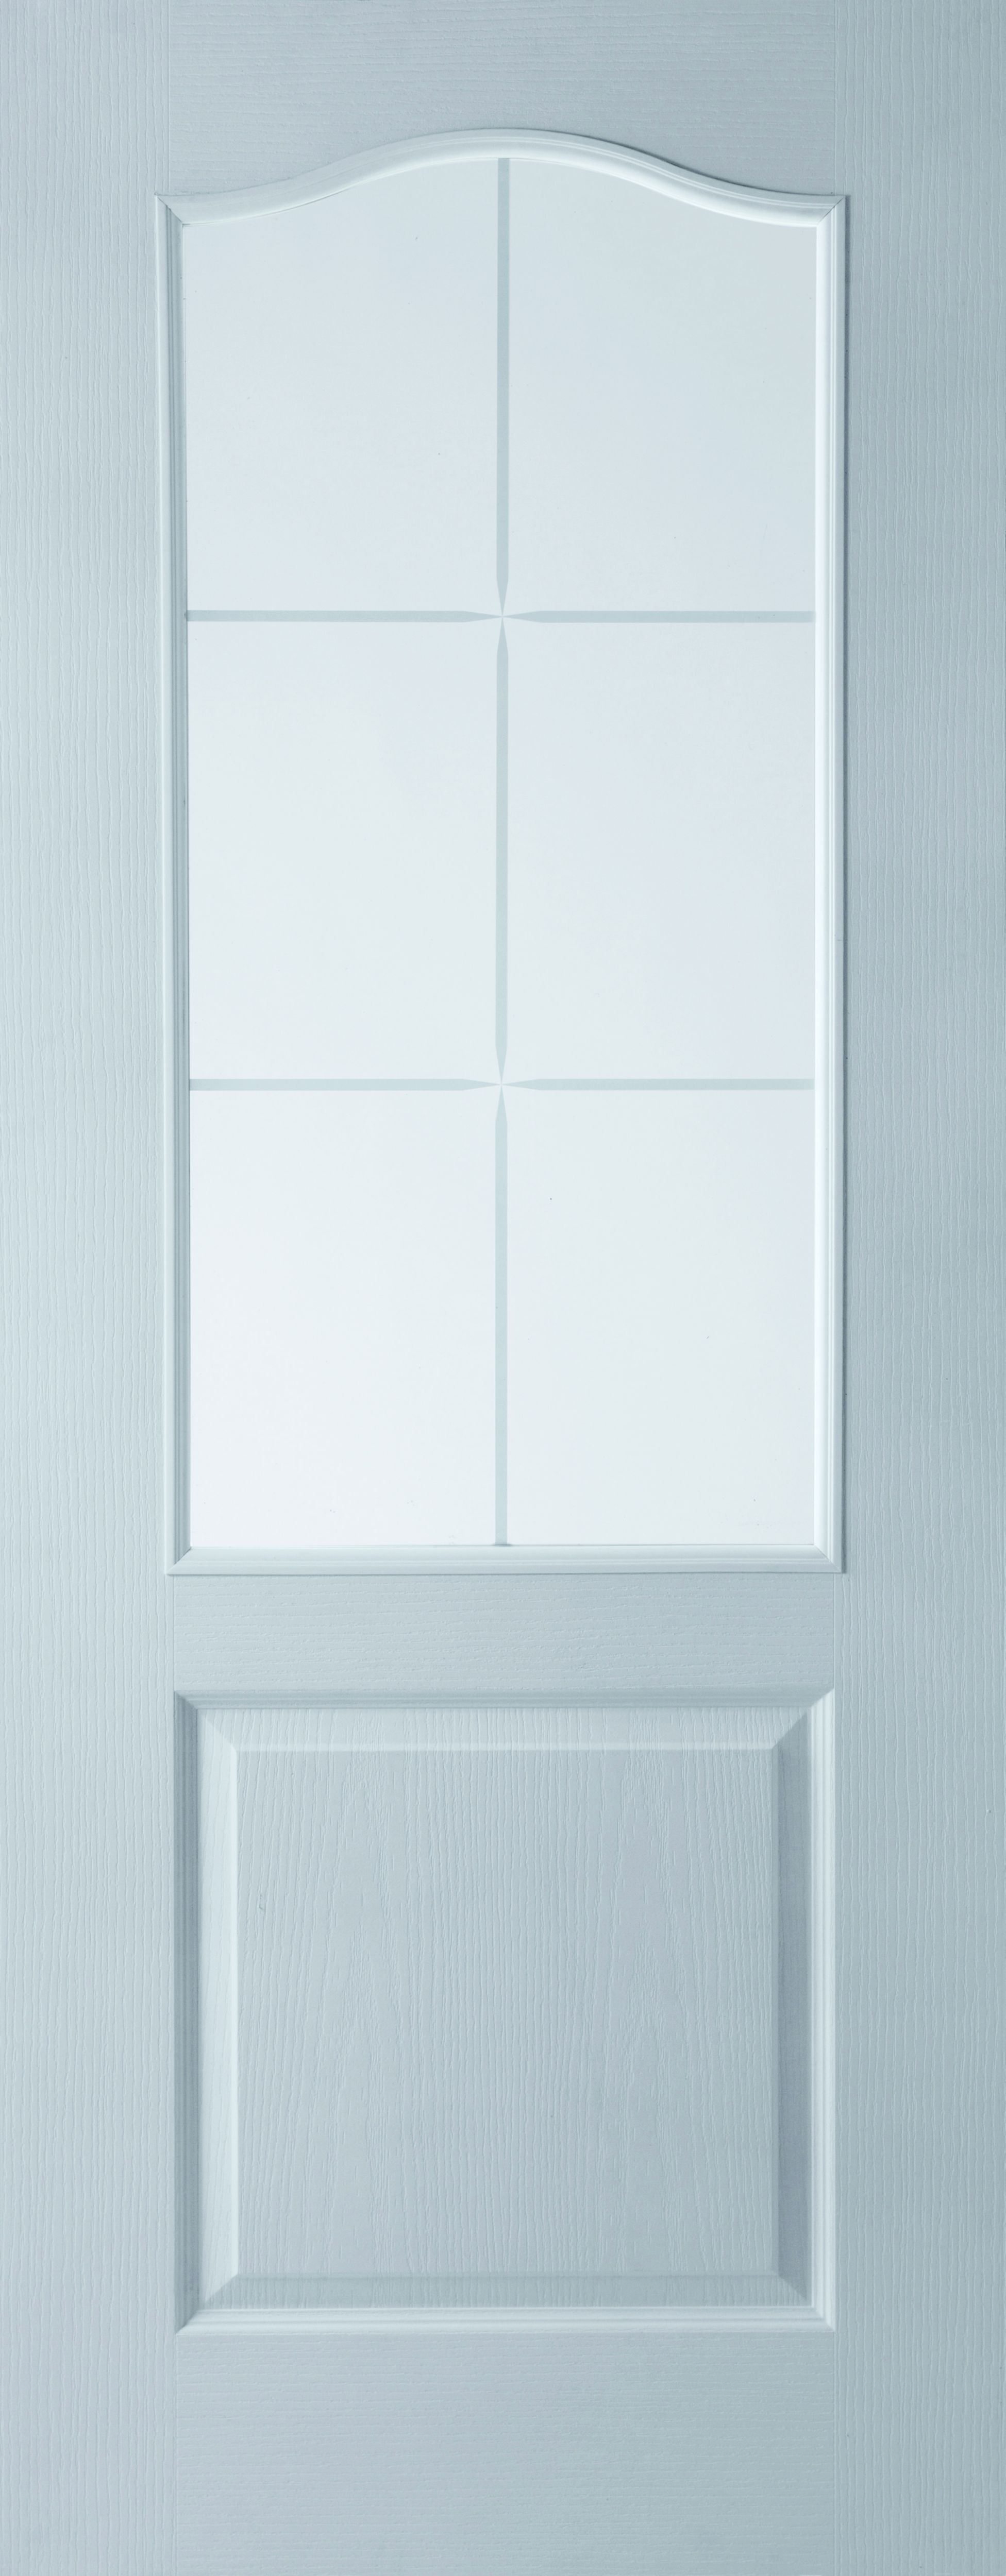 Jeld-Wen Arched 2 panel 6 Lite Clear Glazed Arched White Internal Door, (H)1981mm (W)838mm (T)35mm